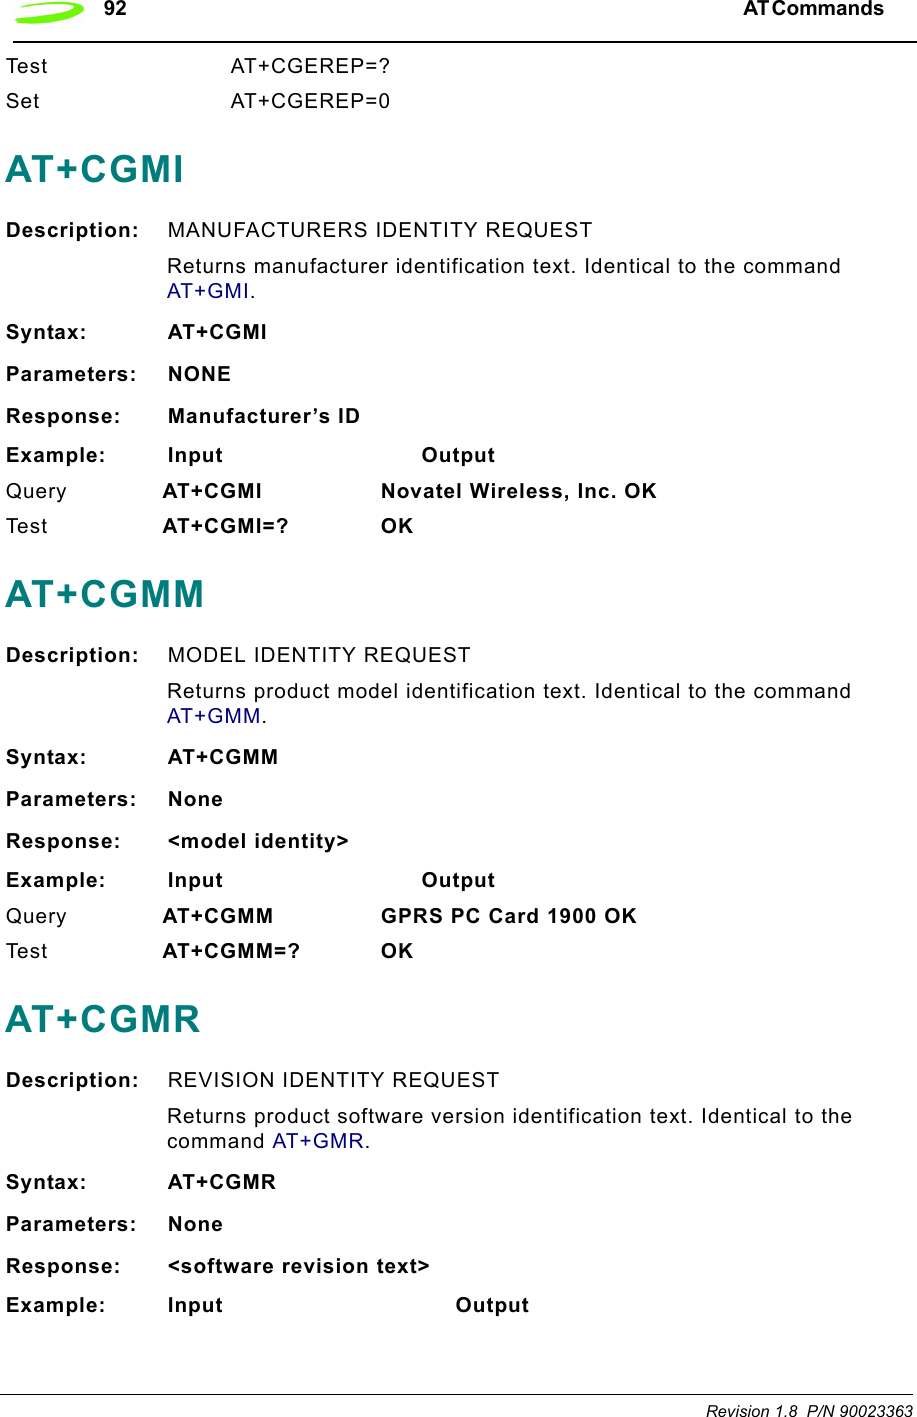 92 AT Commands  Revision 1.8  P/N 90023363Test AT+CGEREP=?Set AT+CGEREP=0AT+CGMIDescription: MANUFACTURERS IDENTITY REQUESTReturns manufacturer identification text. Identical to the command AT+GMI.Syntax: AT+CGMIParameters: NONEResponse: Manufacturer’s IDExample: Input                            OutputQuery  AT+CGMI Novatel Wireless, Inc. OKTe st   AT+CGMI=? OKAT+CGMMDescription: MODEL IDENTITY REQUESTReturns product model identification text. Identical to the command AT+GMM.Syntax: AT+CGMMParameters: NoneResponse: &lt;model identity&gt;Example: Input                            OutputQuery  AT+CGMM GPRS PC Card 1900 OKTe s t   AT+CGMM=? OKAT+CGMRDescription: REVISION IDENTITY REQUESTReturns product software version identification text. Identical to the command AT+GMR.Syntax: AT+CGMRParameters: NoneResponse: &lt;software revision text&gt;Example: Input                                 Output